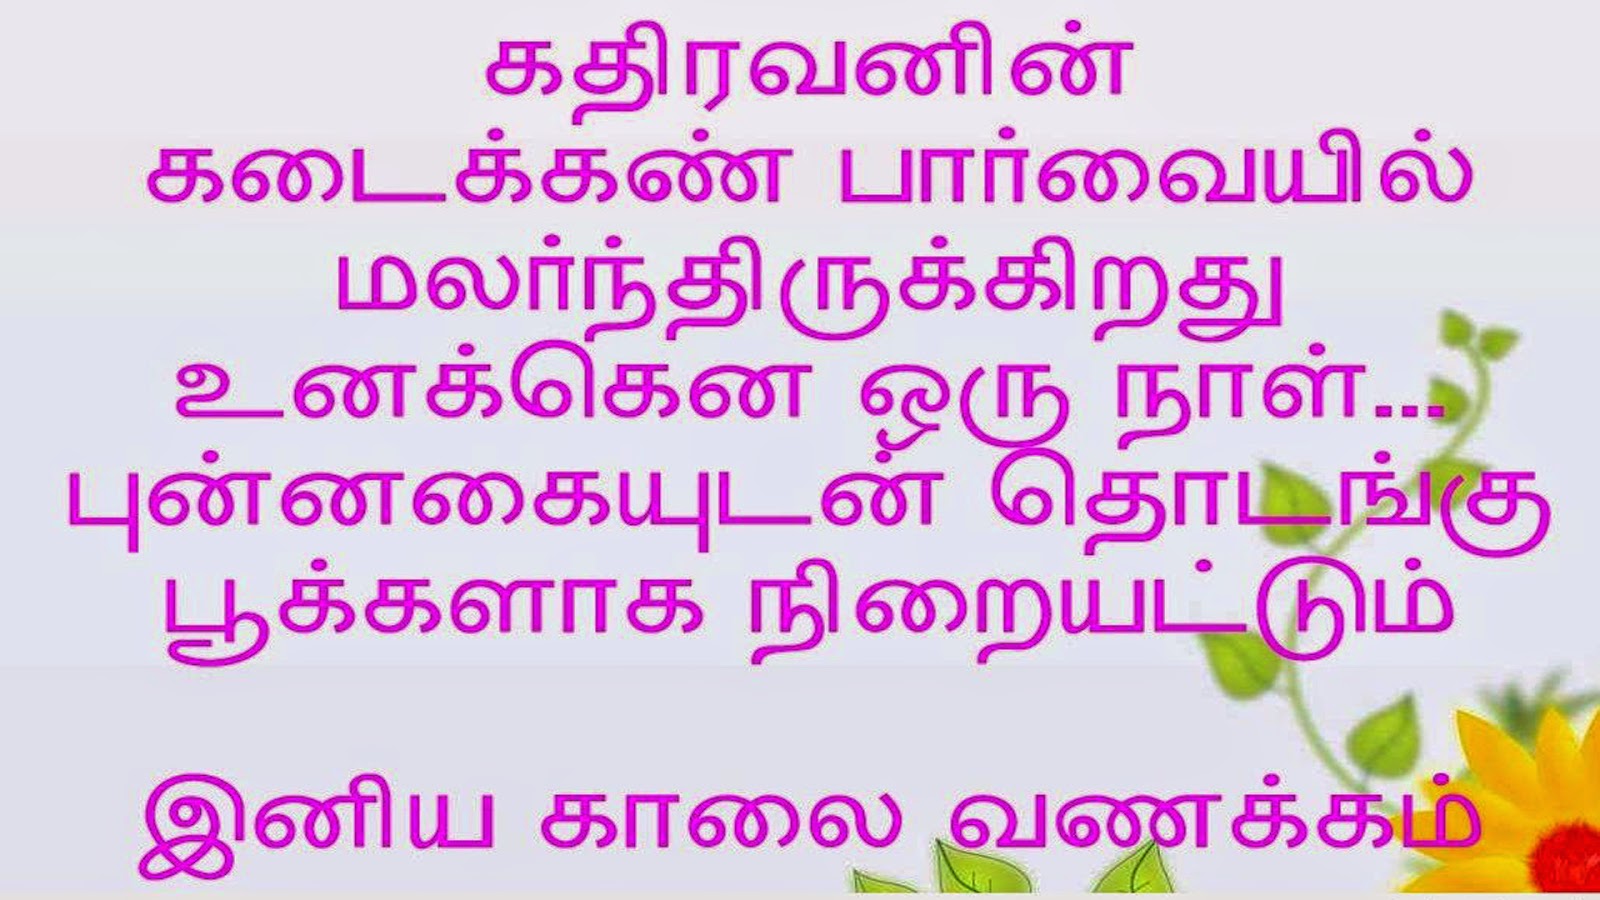 NICE QUOTES: WISDOM THOUGHTS (Tamil)